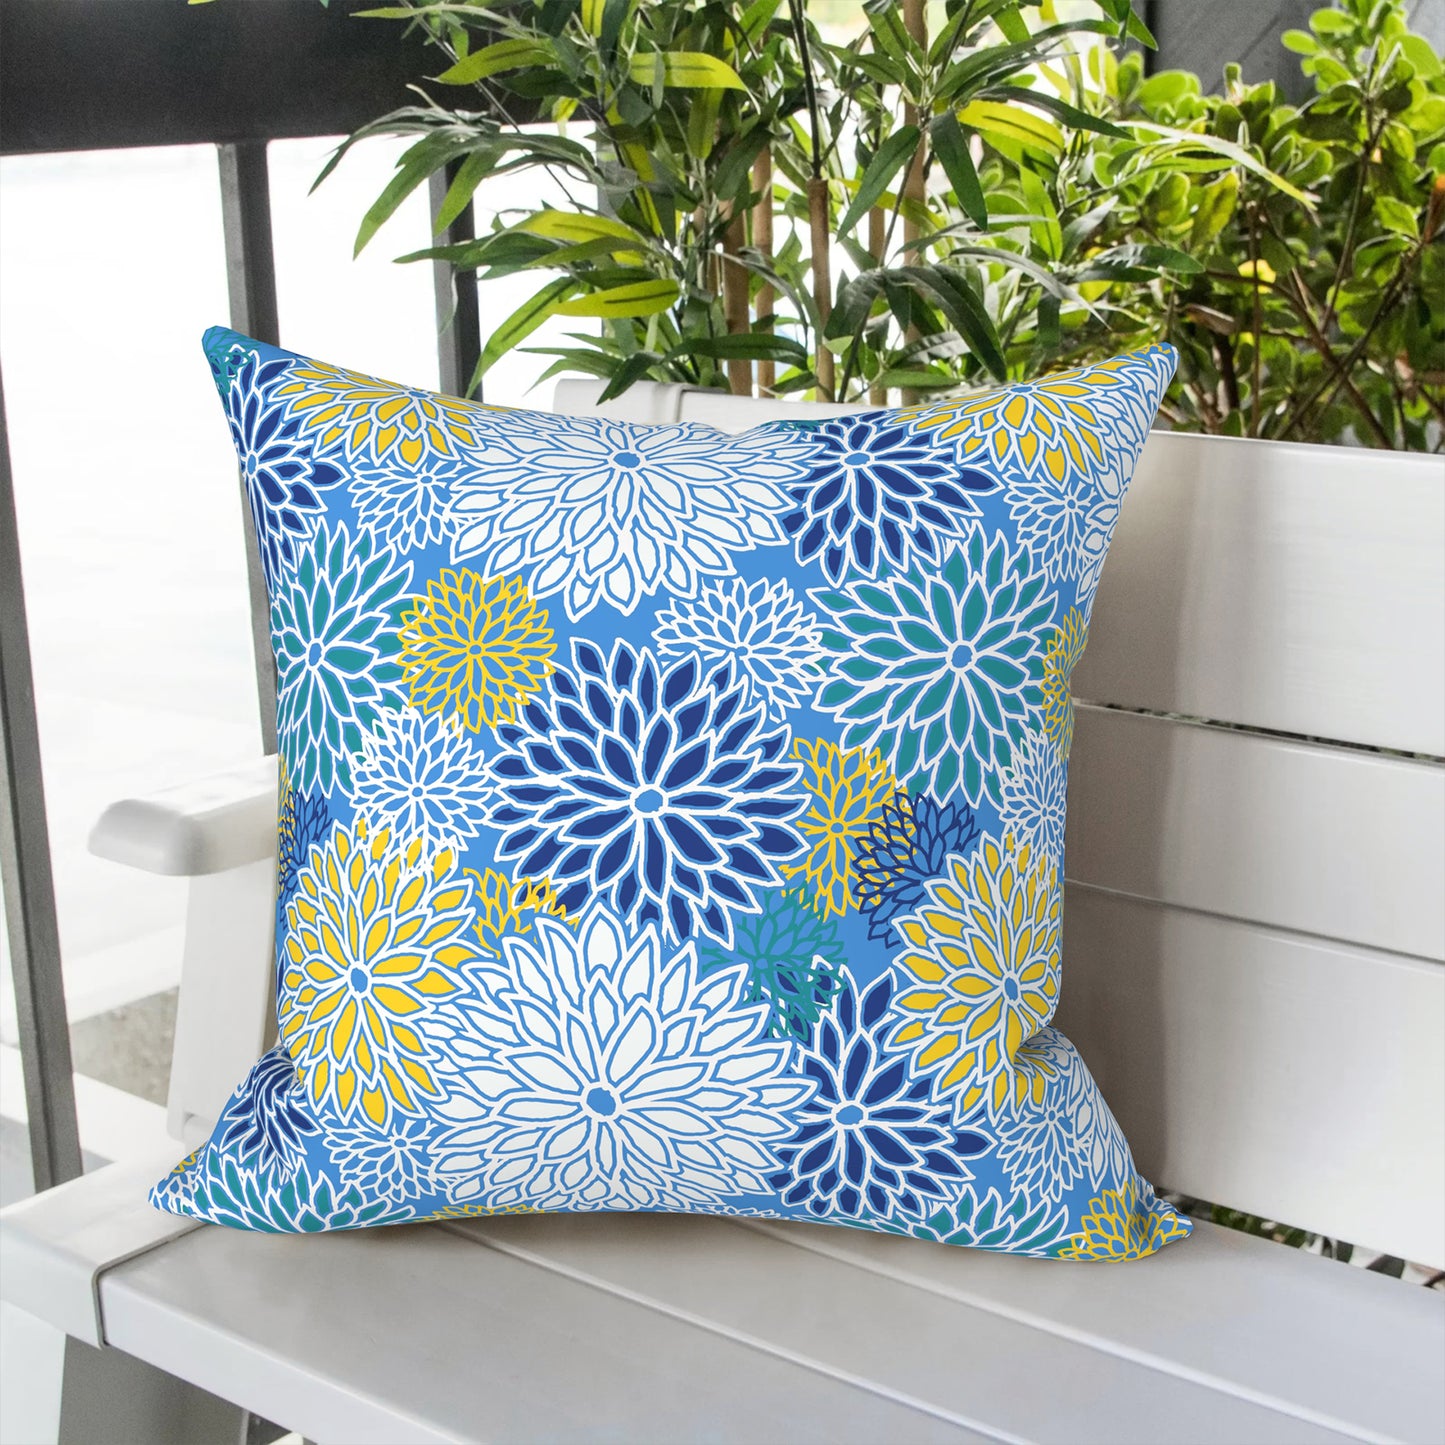 Melody Elephant Patio Throw Pillows with Inners, Fade Resistant Square Pillow Pack of 2, Decorative Garden Cushions for Home, 18x18 Inch, Dahlia Blue